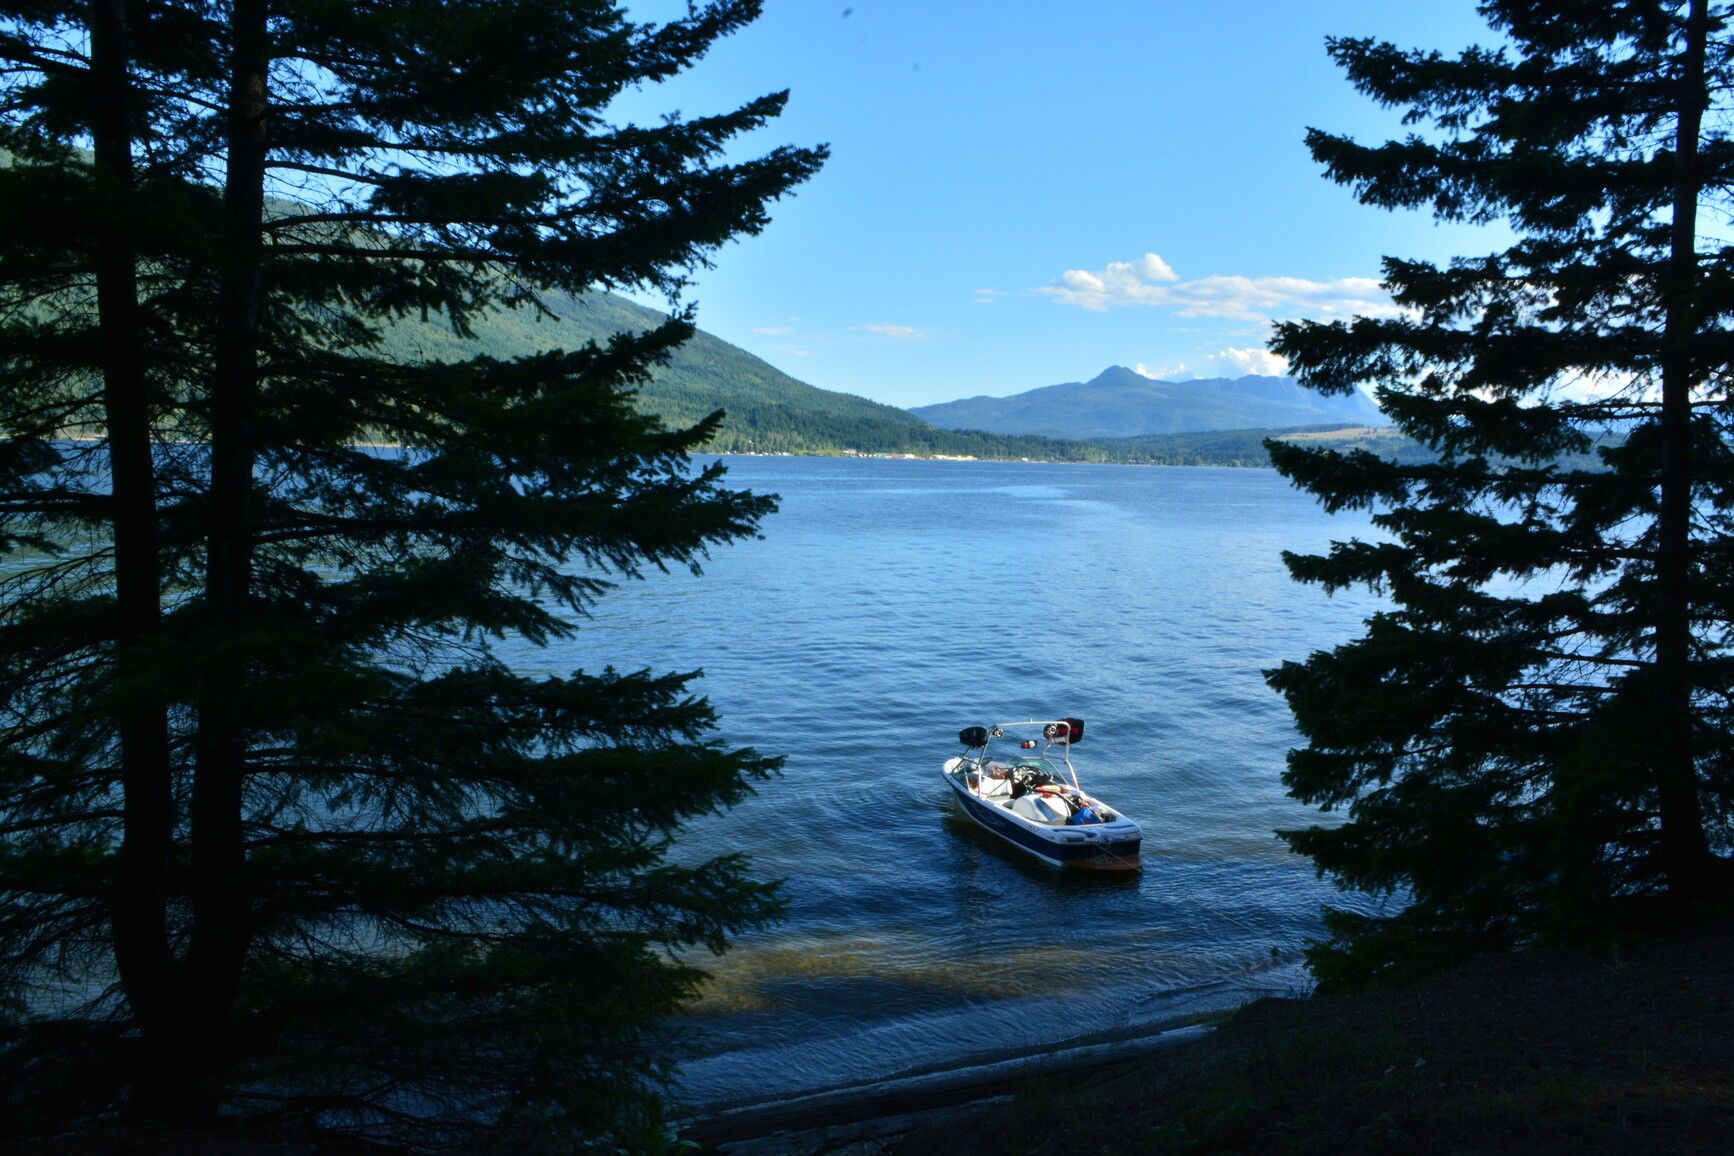 Herald Park, a great place to anchor your boat on the shore of Shuswap Lake and explore.